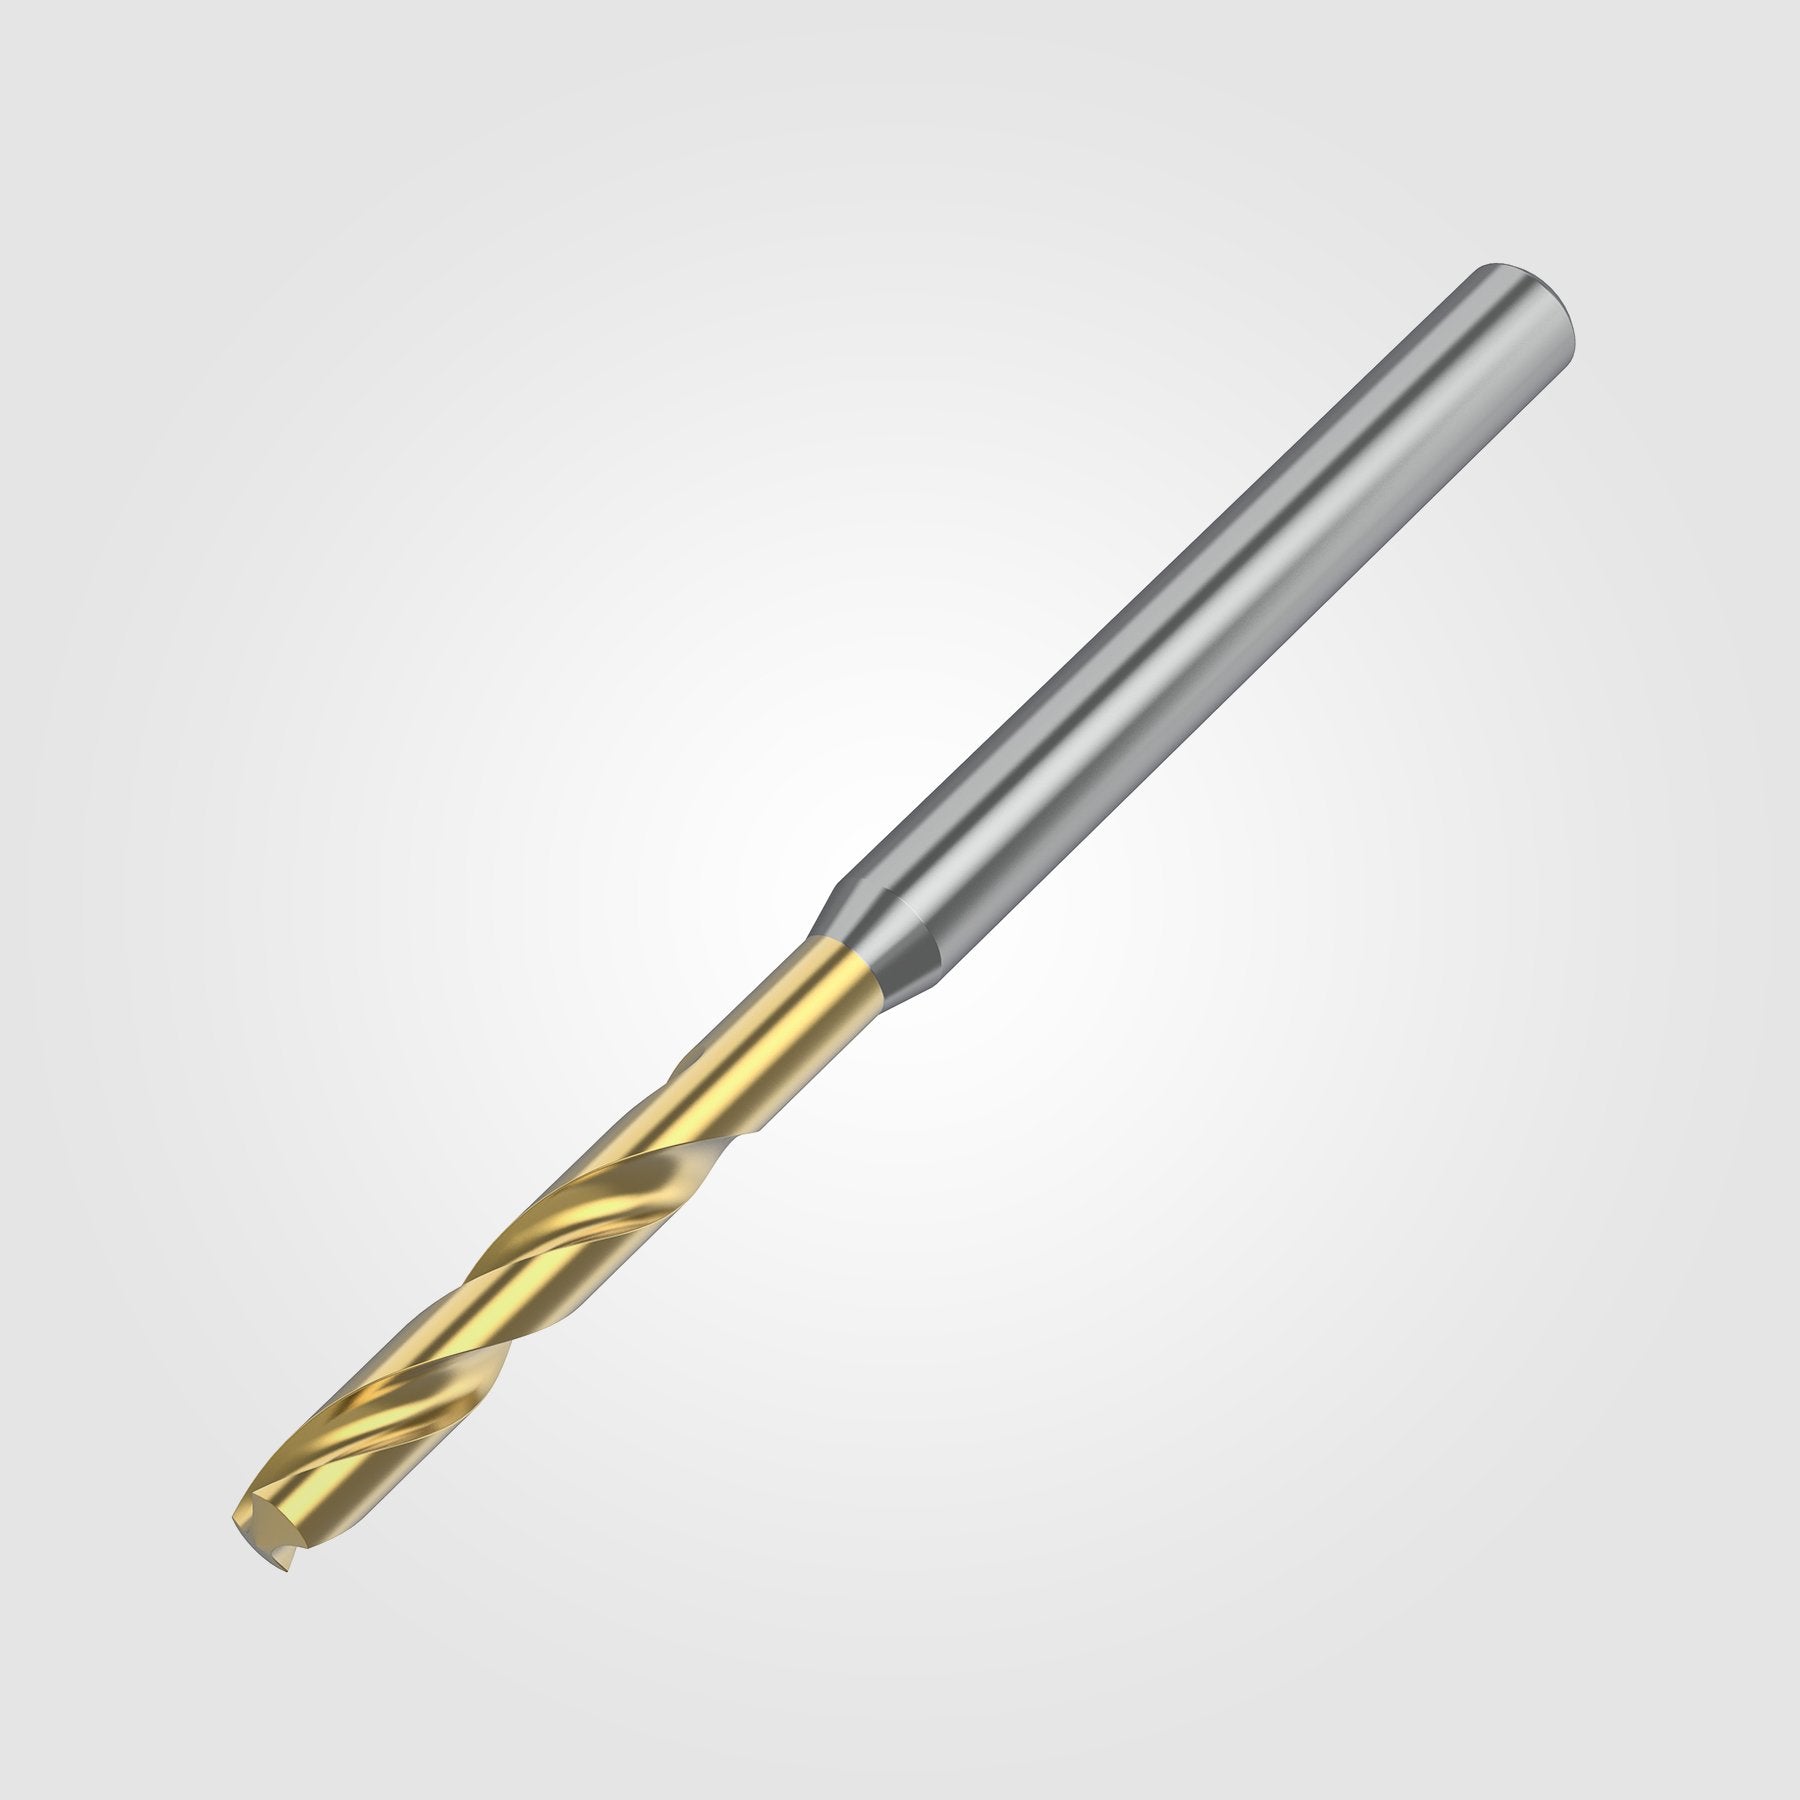 GOdrill (THROUGH COOLANT) | 7.9mm / .3110" / 3xD | SOLID CARBIDE DRILL | 4151173